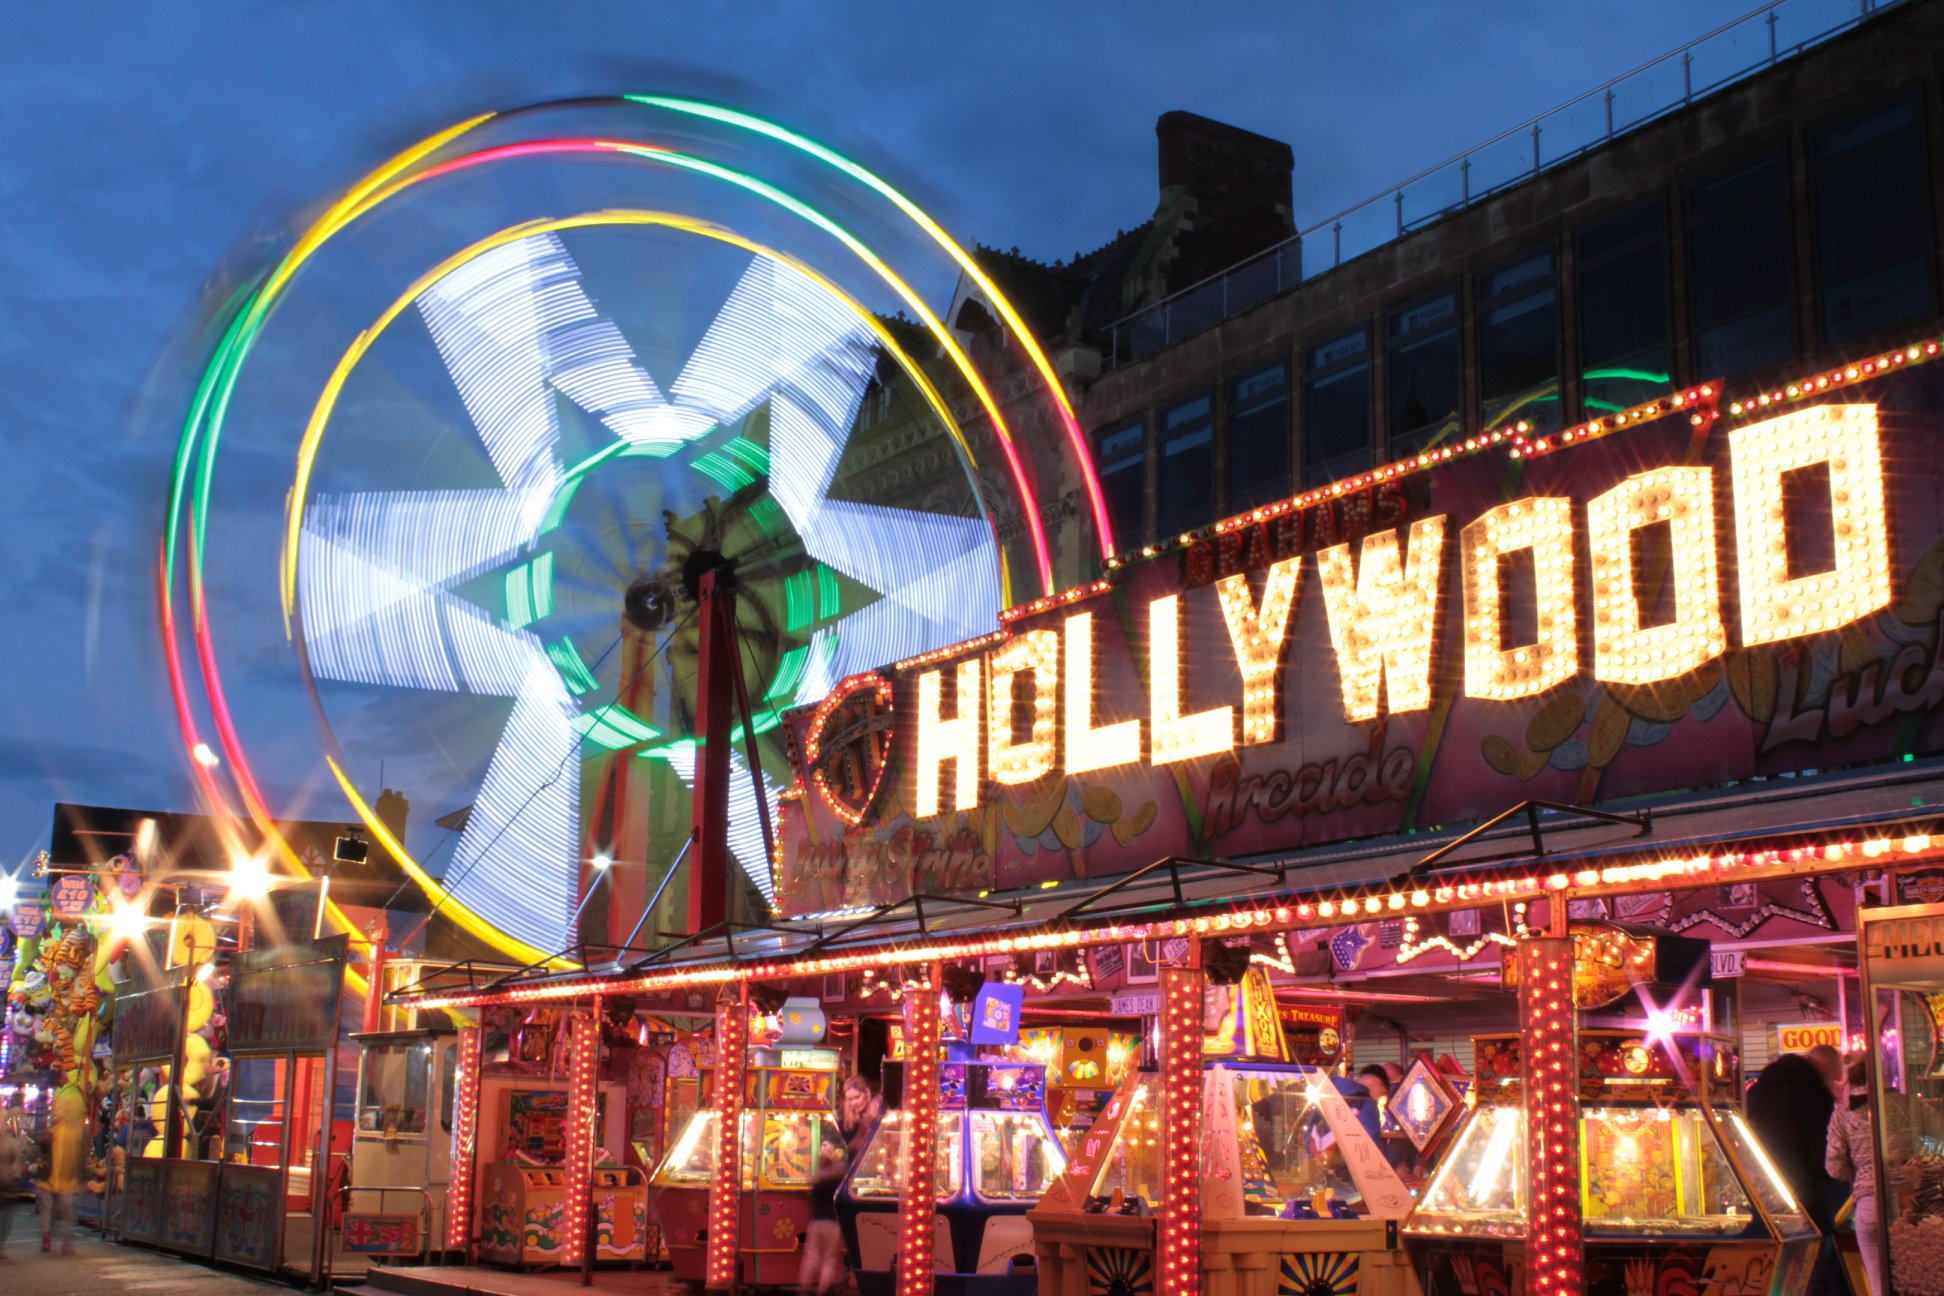 NEWS | A reminder that the date for Hereford & Leominster’s May Fair has changed